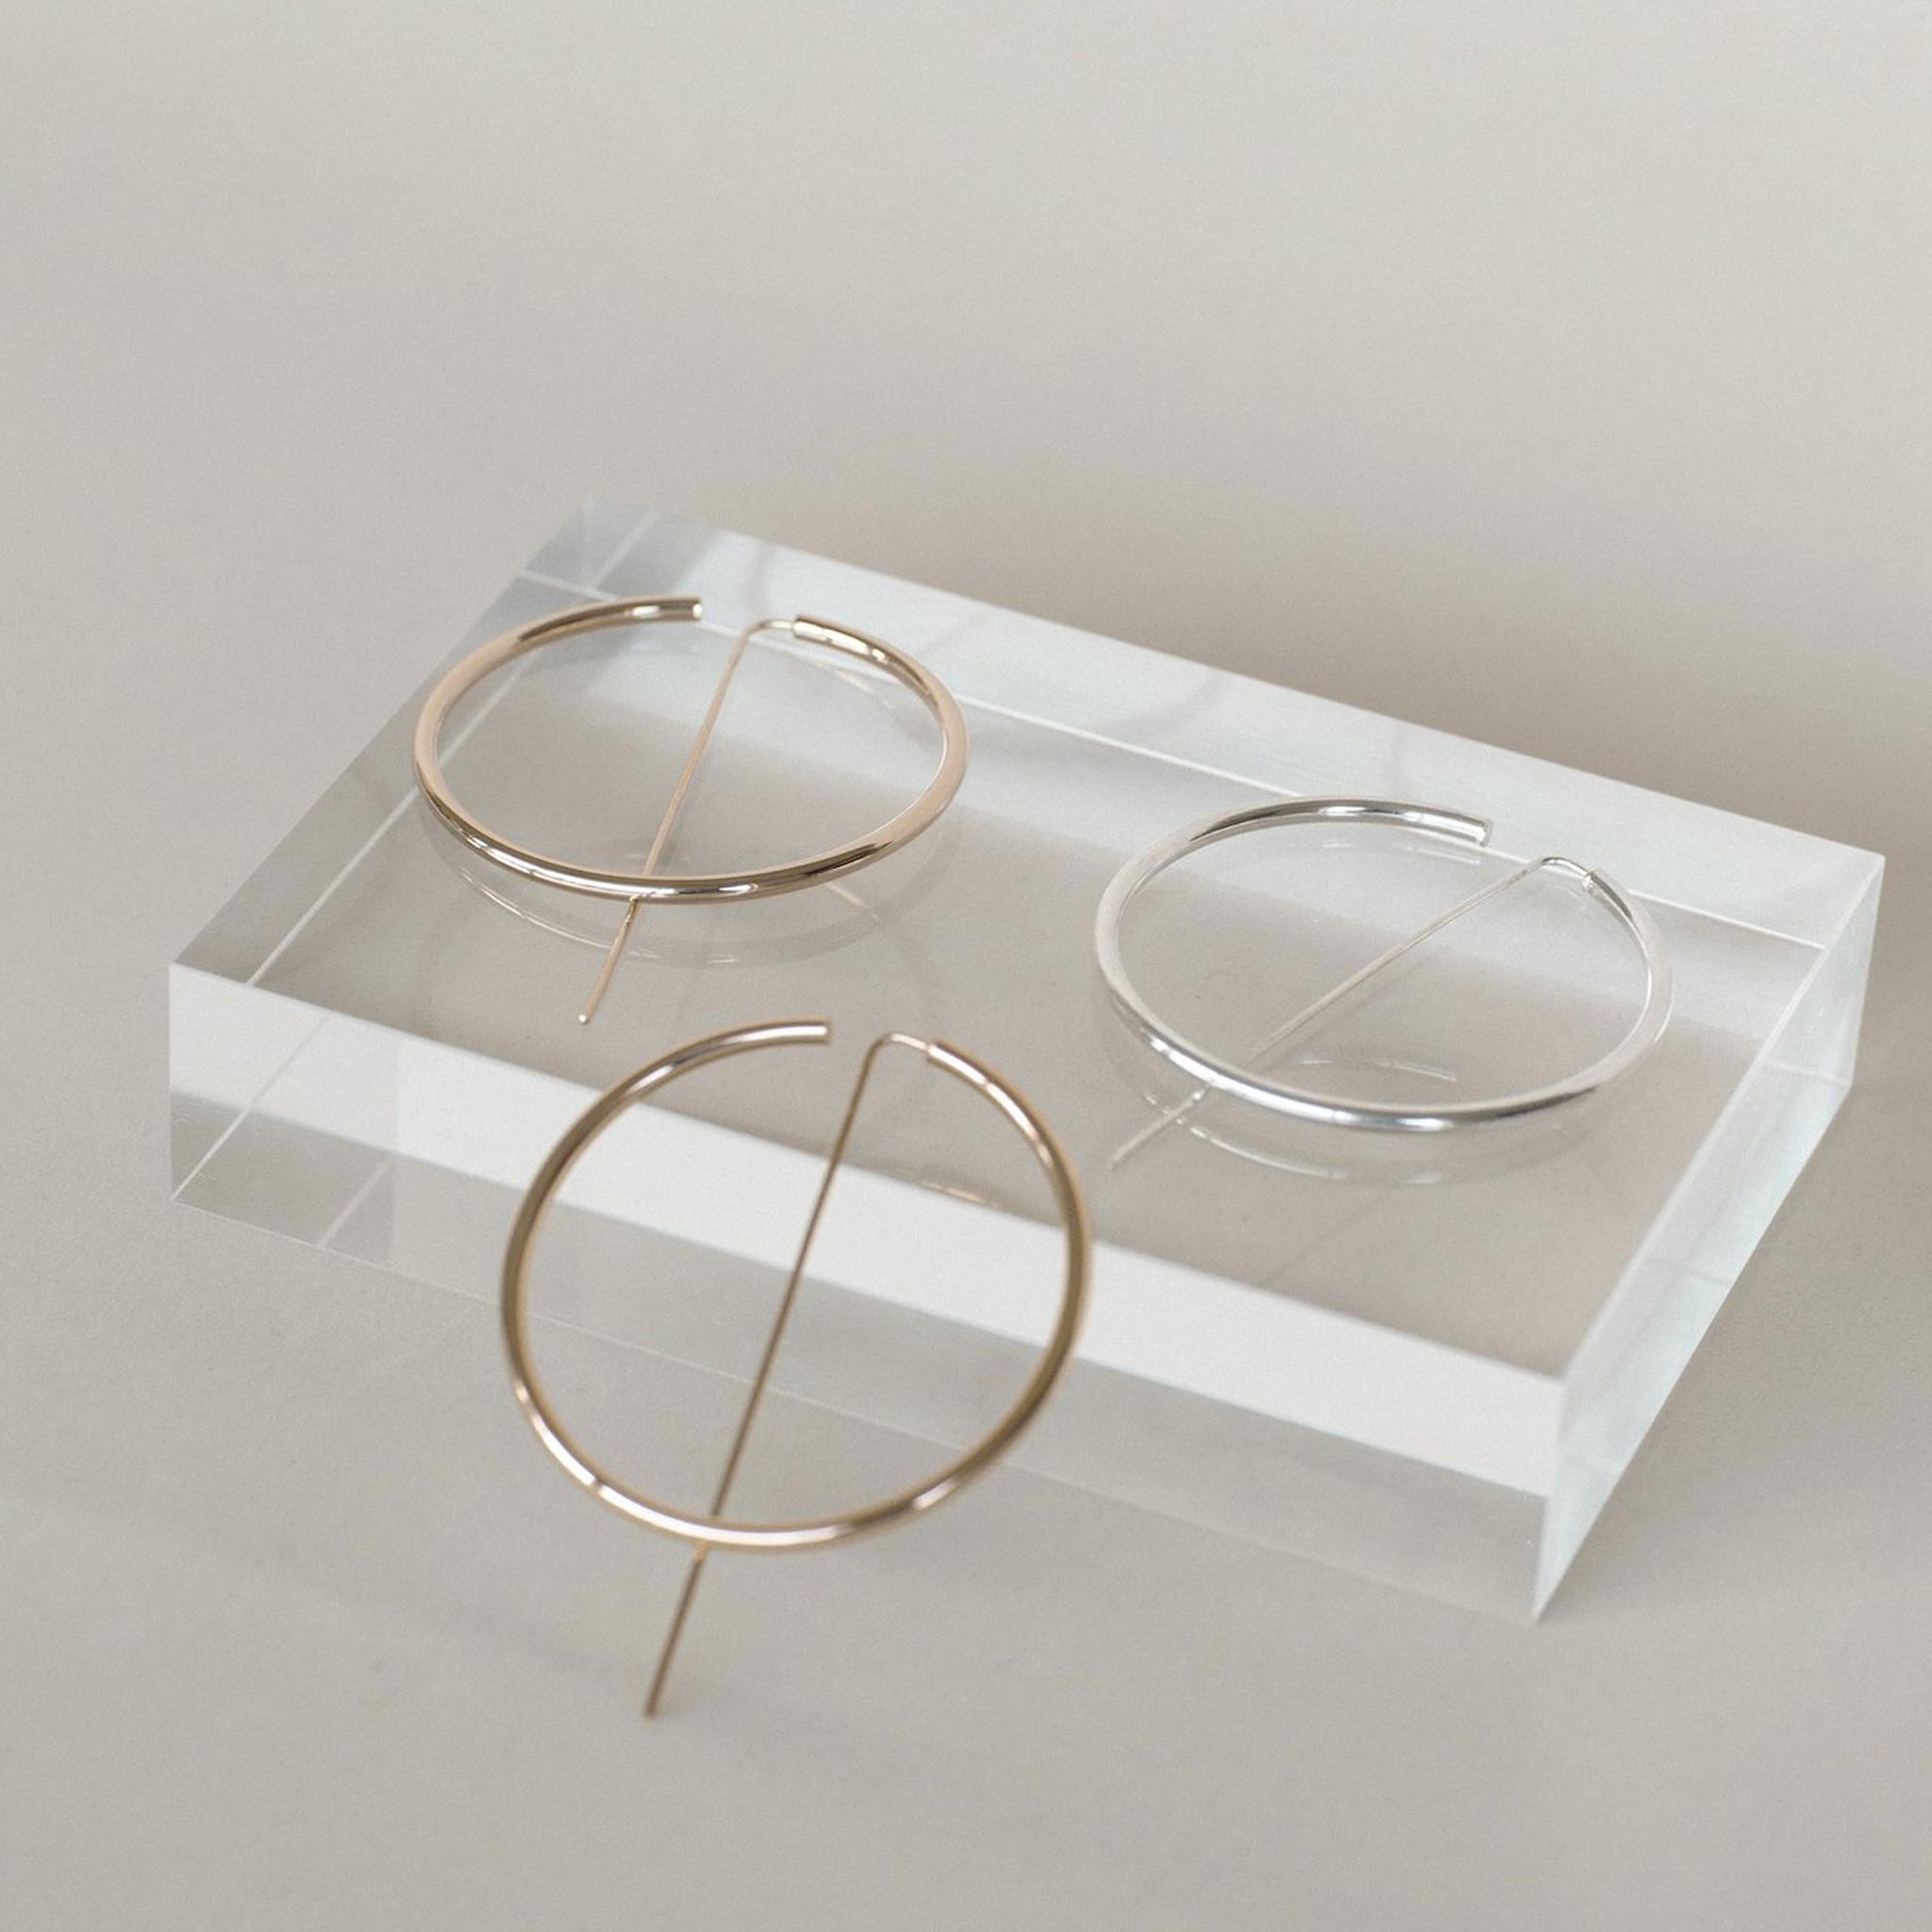 Jaclyn Moran - Oversized Hoop & Post Earrings in Rose Gold, Yellow Gold, and Sterling Silver.